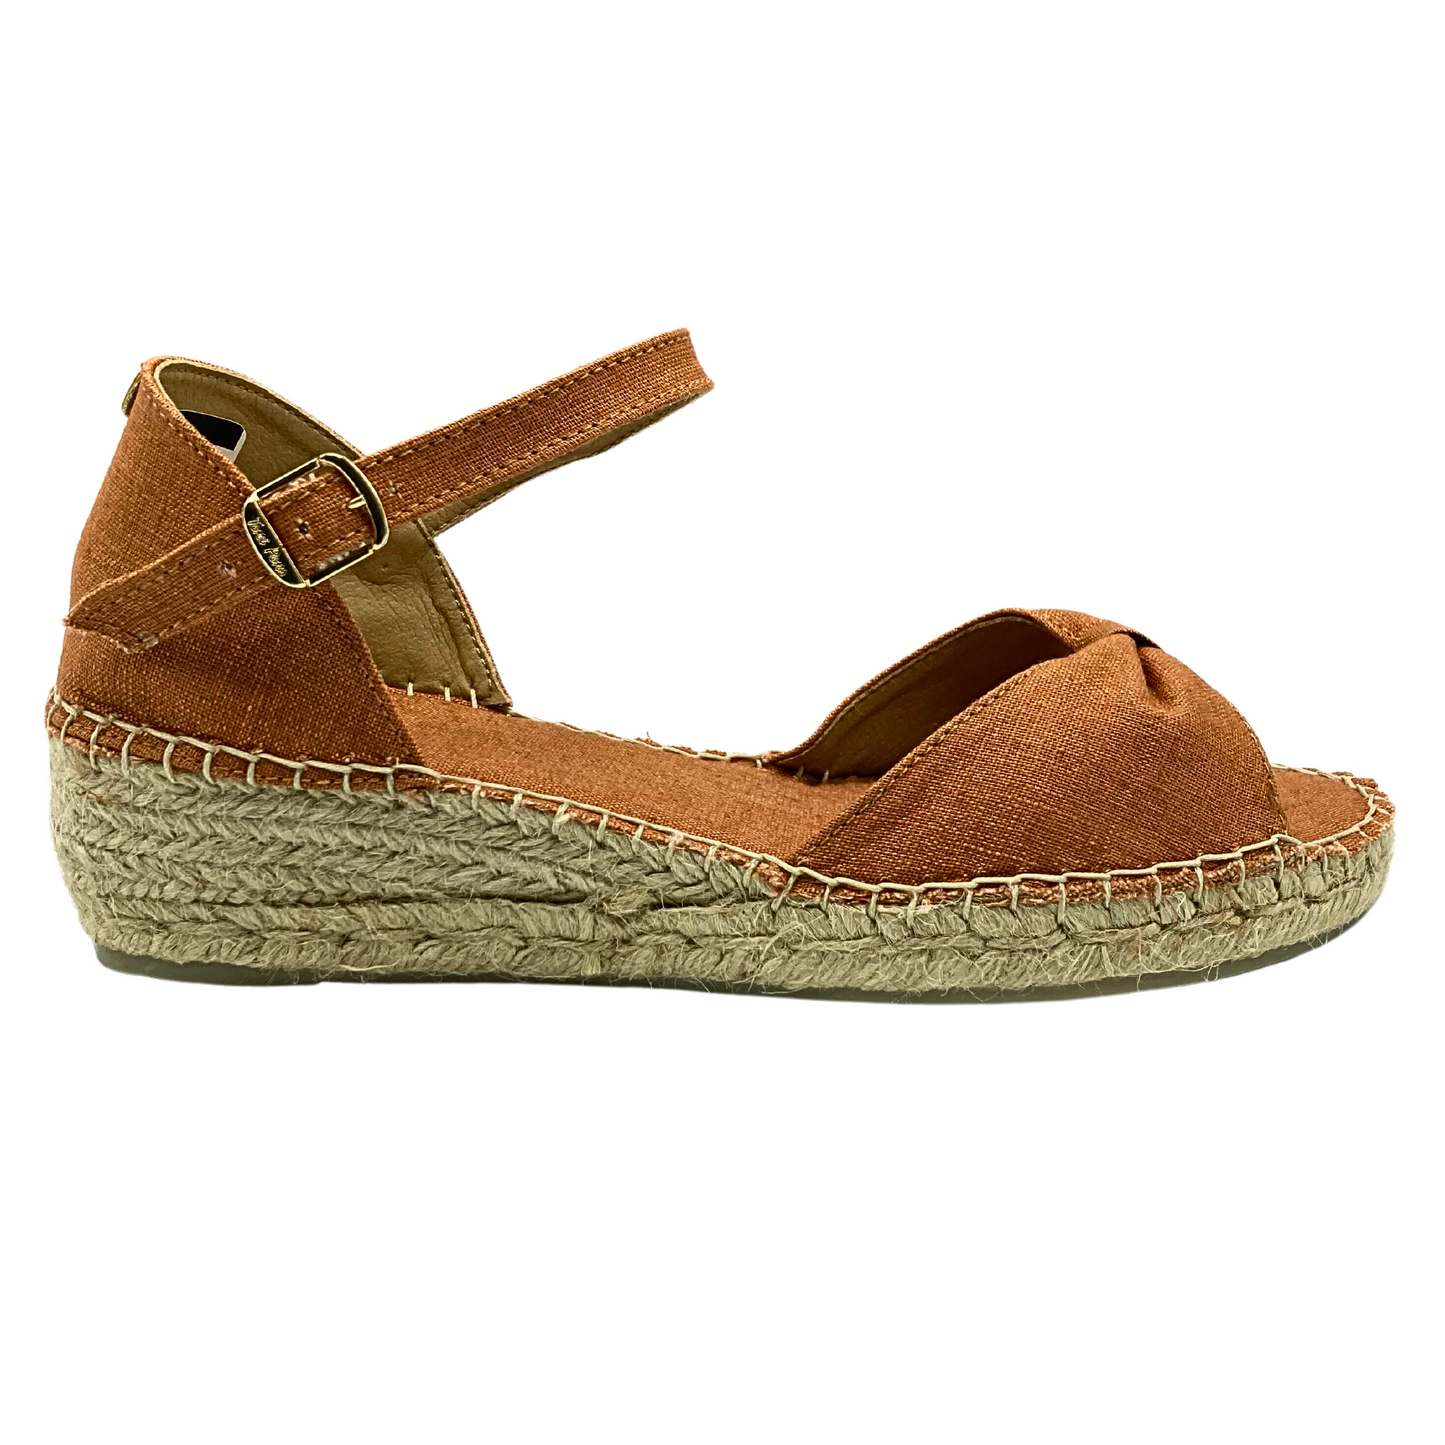 Outside view of espadrille sandal in a paprika color.  Low wedge heel in a woven rope.  Upper is a textile 